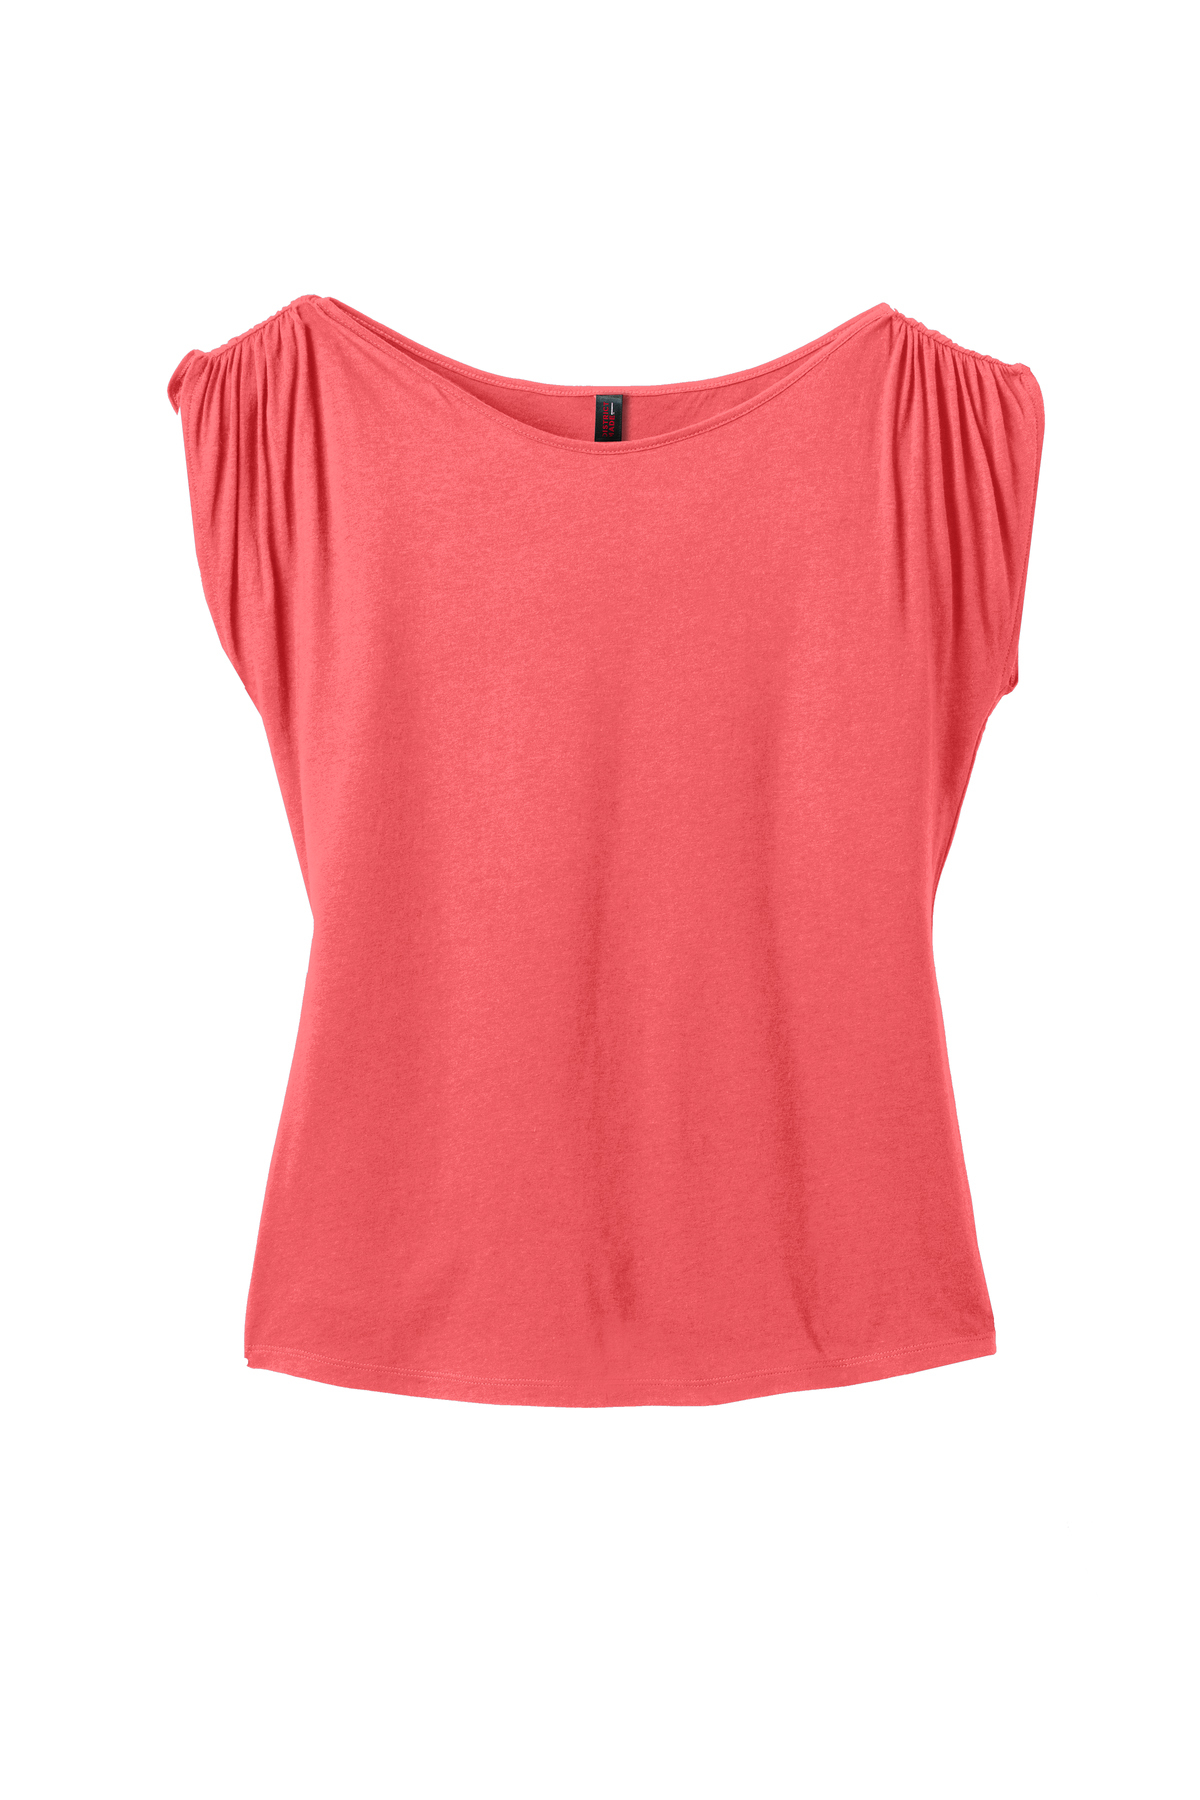 District Made Ladies Modal Blend Gathered Shoulder Tee | Product | SanMar